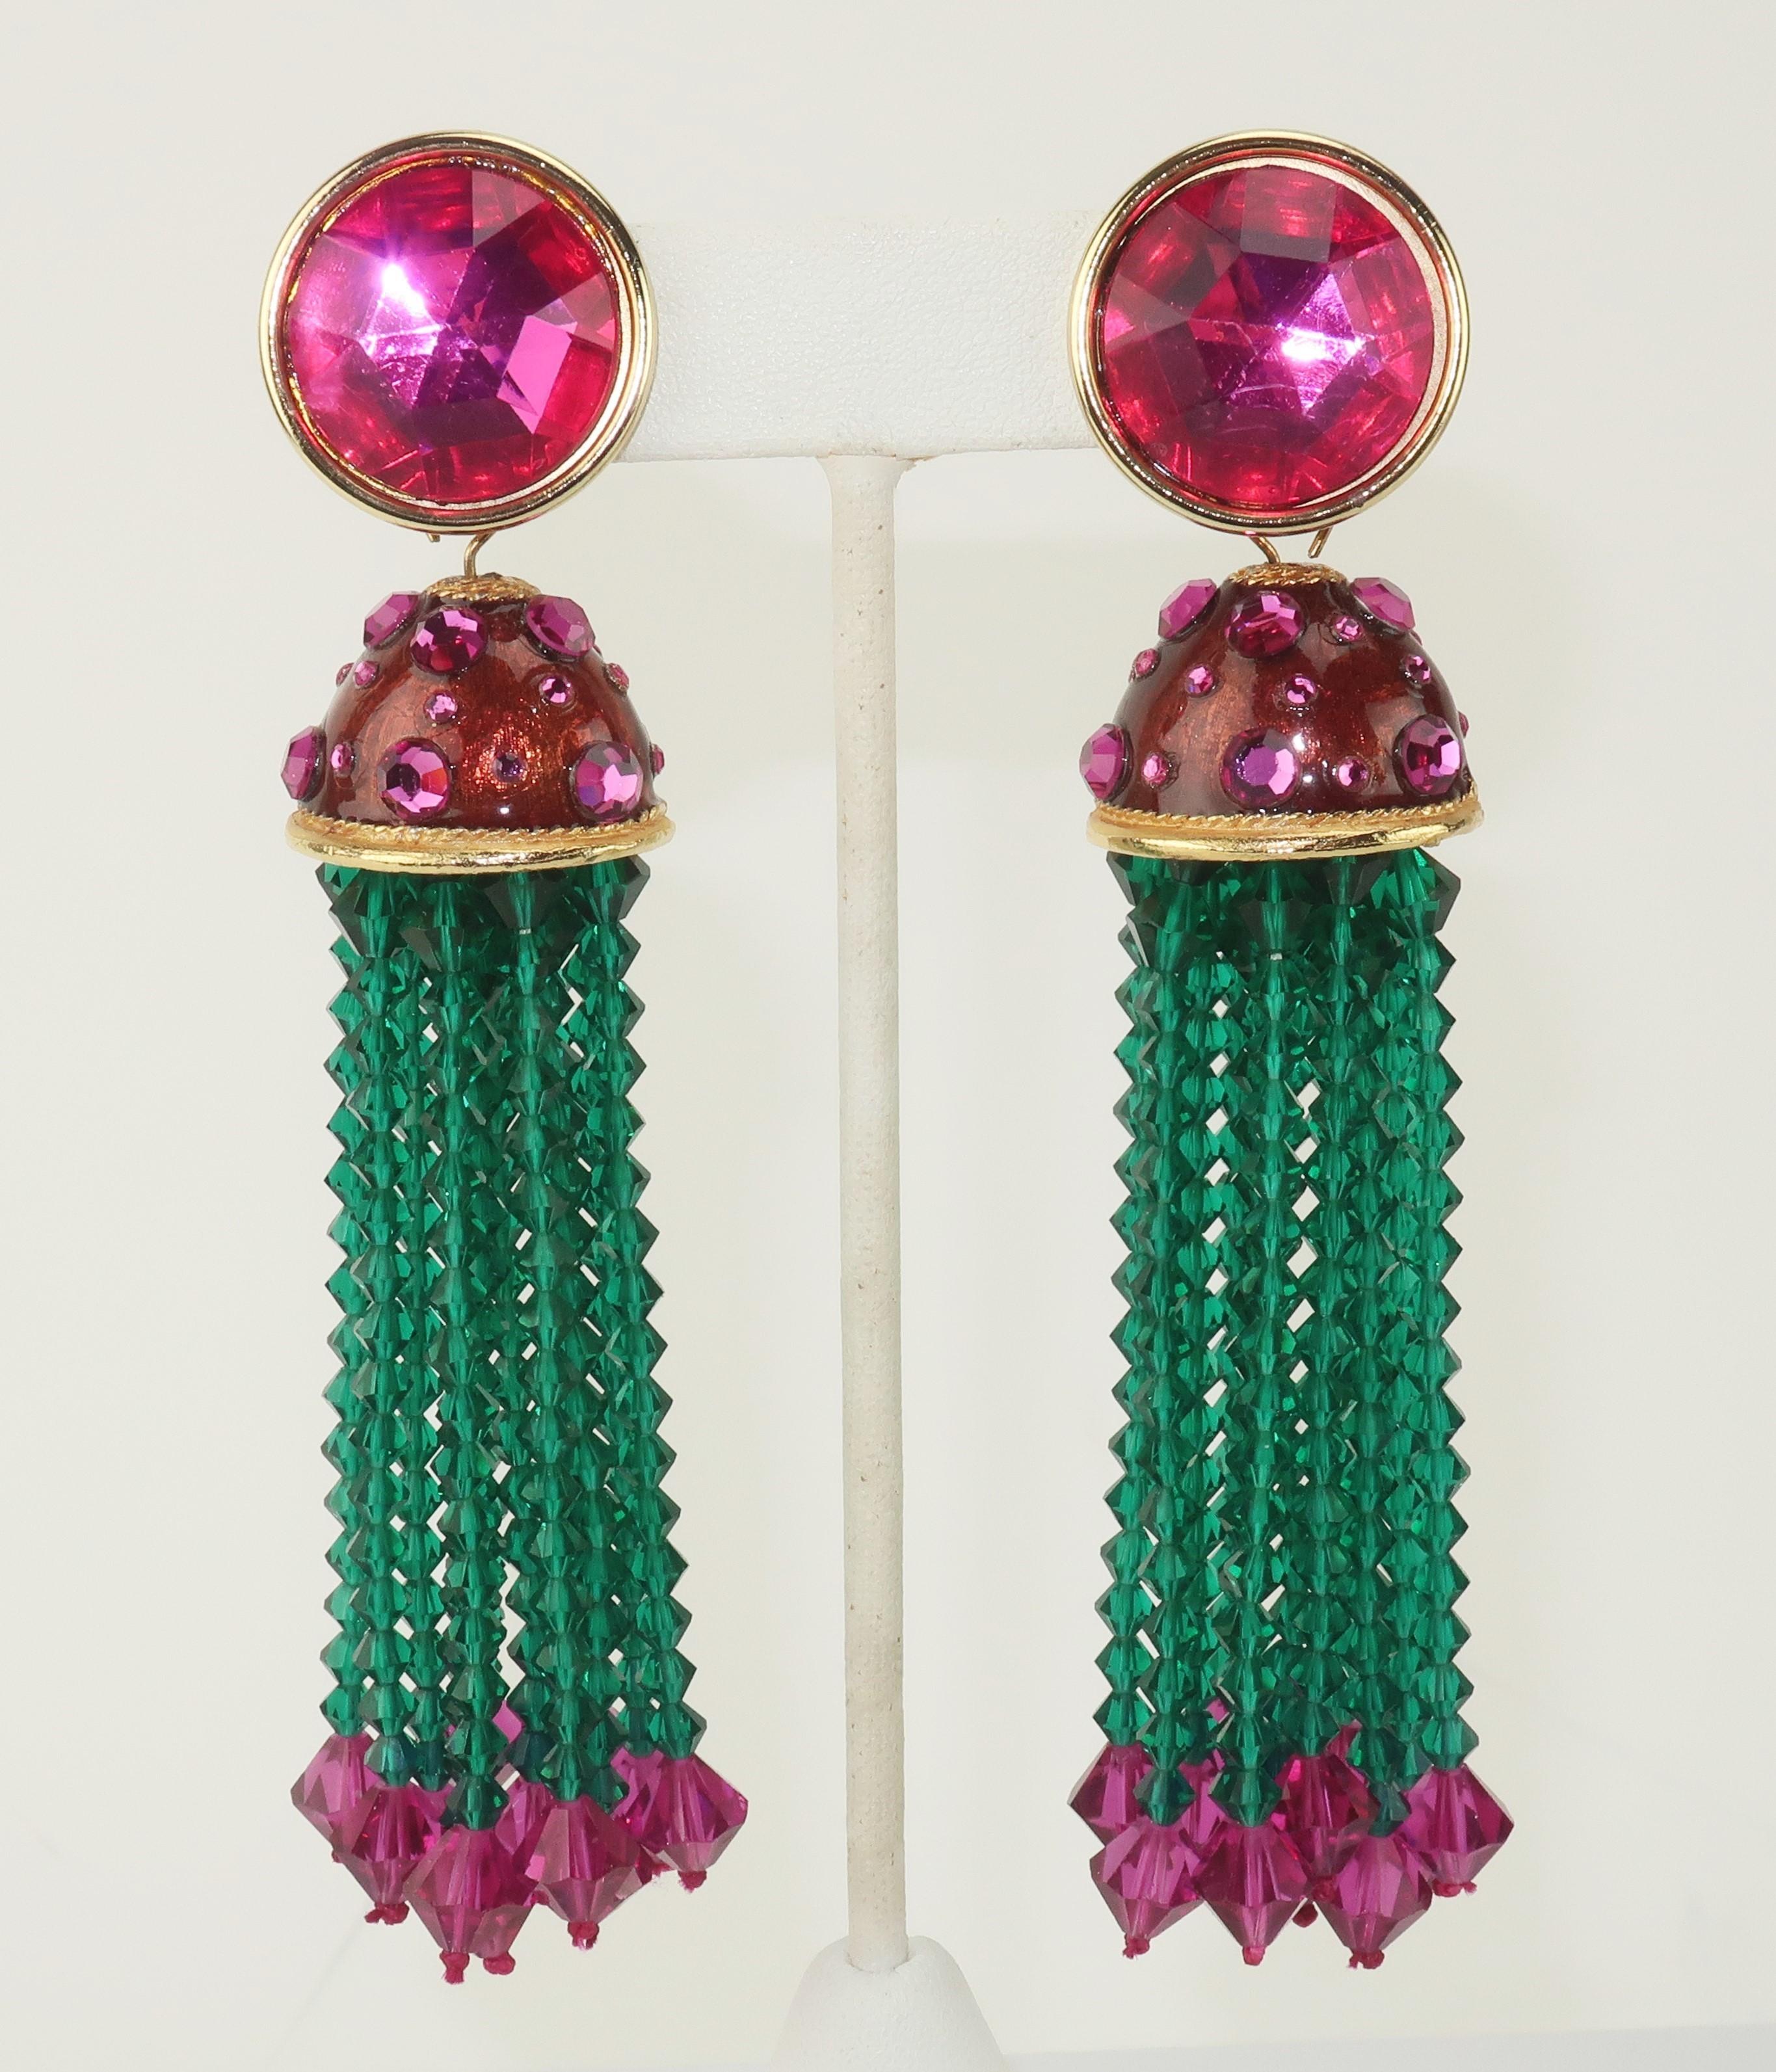 1980’s hot pink and green beaded tassel earrings.  The gold tone clip on bases are accented with faceted hot pink resin stones which suspend a bell shaped enamel dangle embellished with hot pink pave crystals.  They offer a wonderful pop of color in